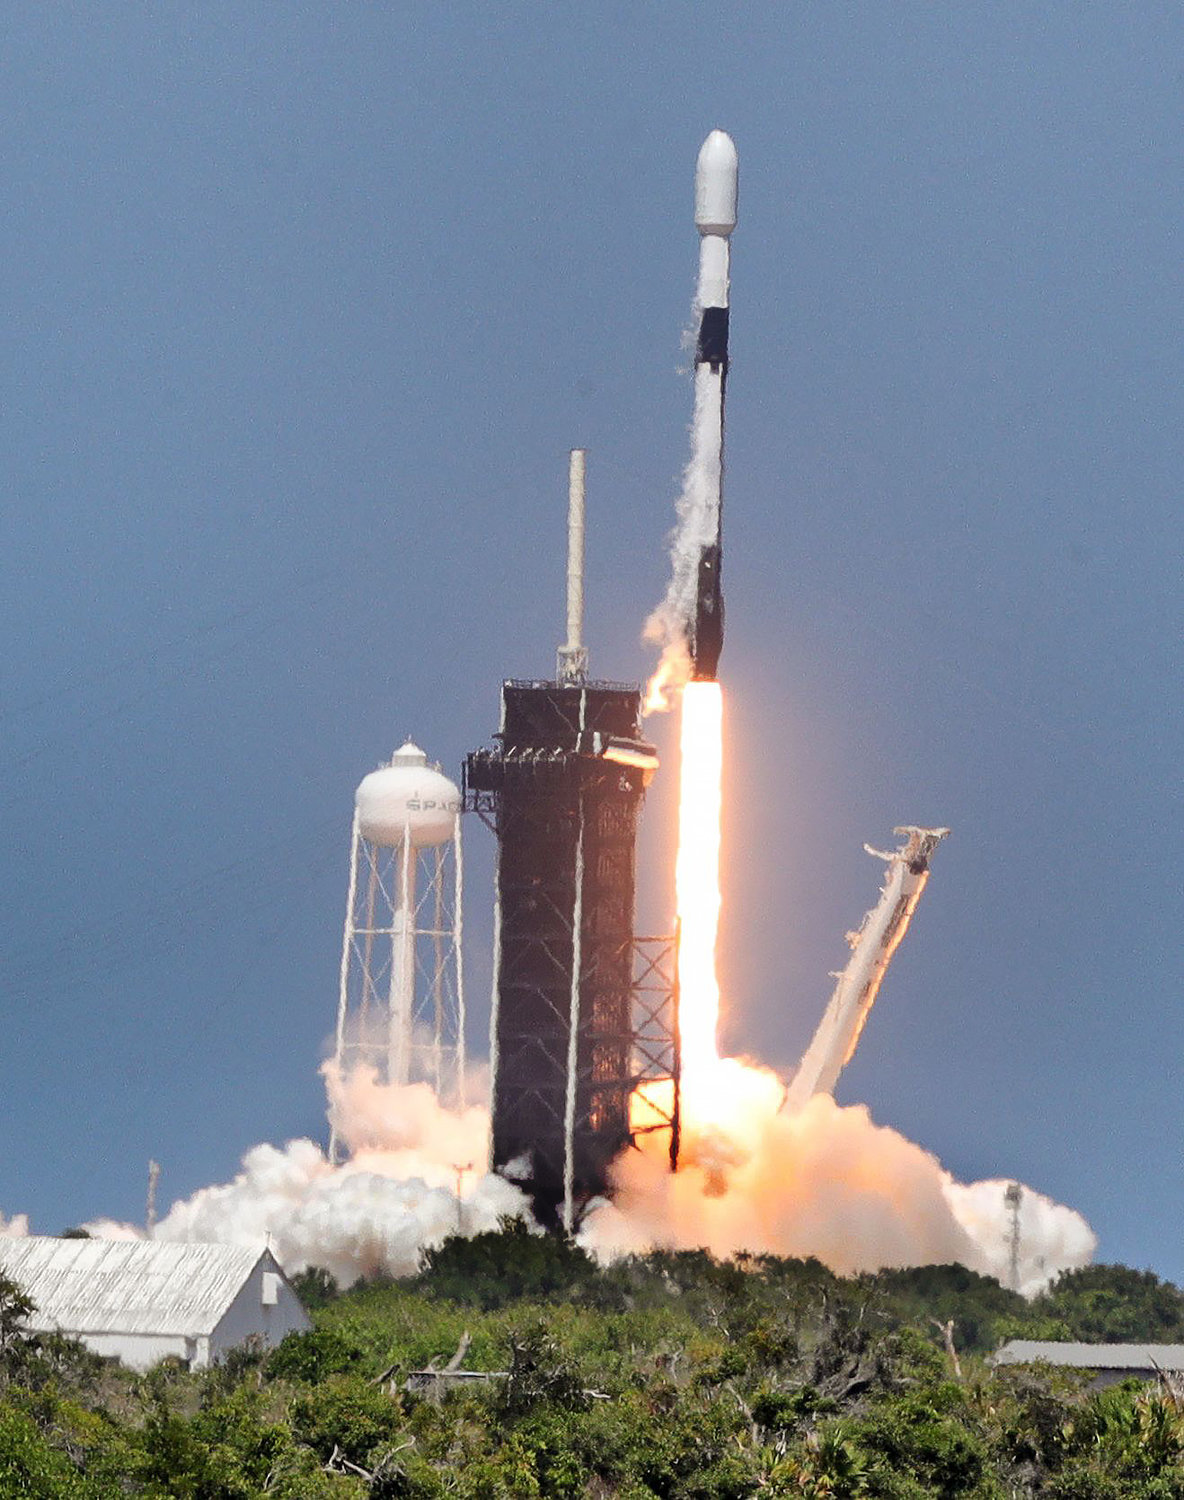 A SpaceX Falcon 9 lifts off from Launch Pad 39-A at Kennedy Space Center, Tuesday, May 4, 2021. (Joe Burbank/Orlando Sentinel/TNS)